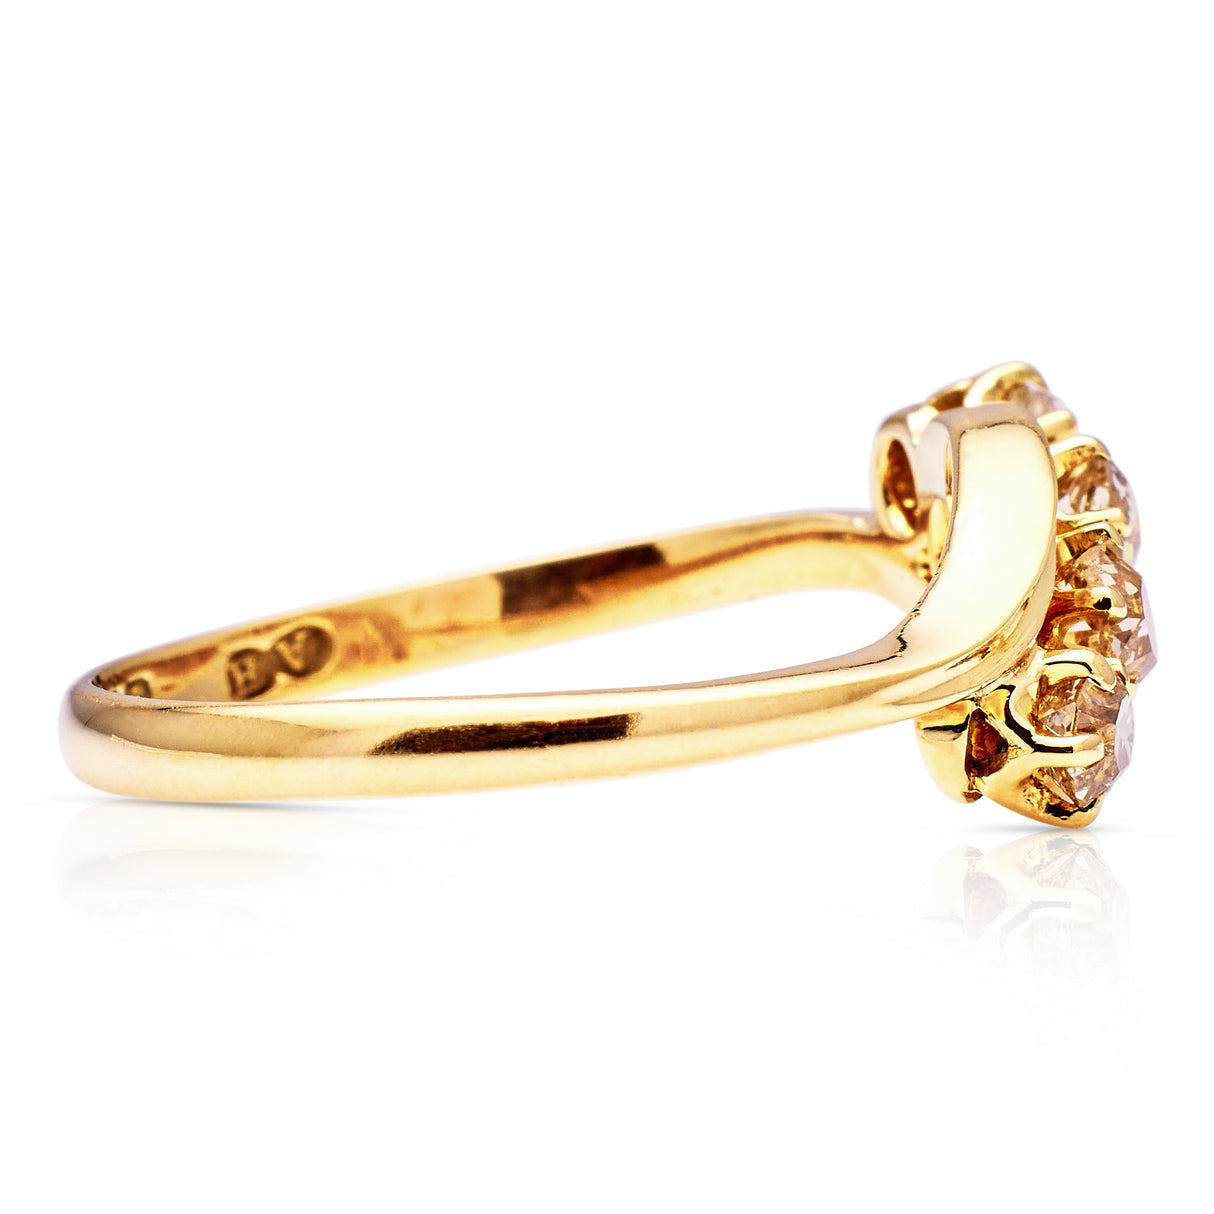 Antique, Edwardian Twist Four-Stone Diamond Engagement Ring, 18ct Yellow Gold side view